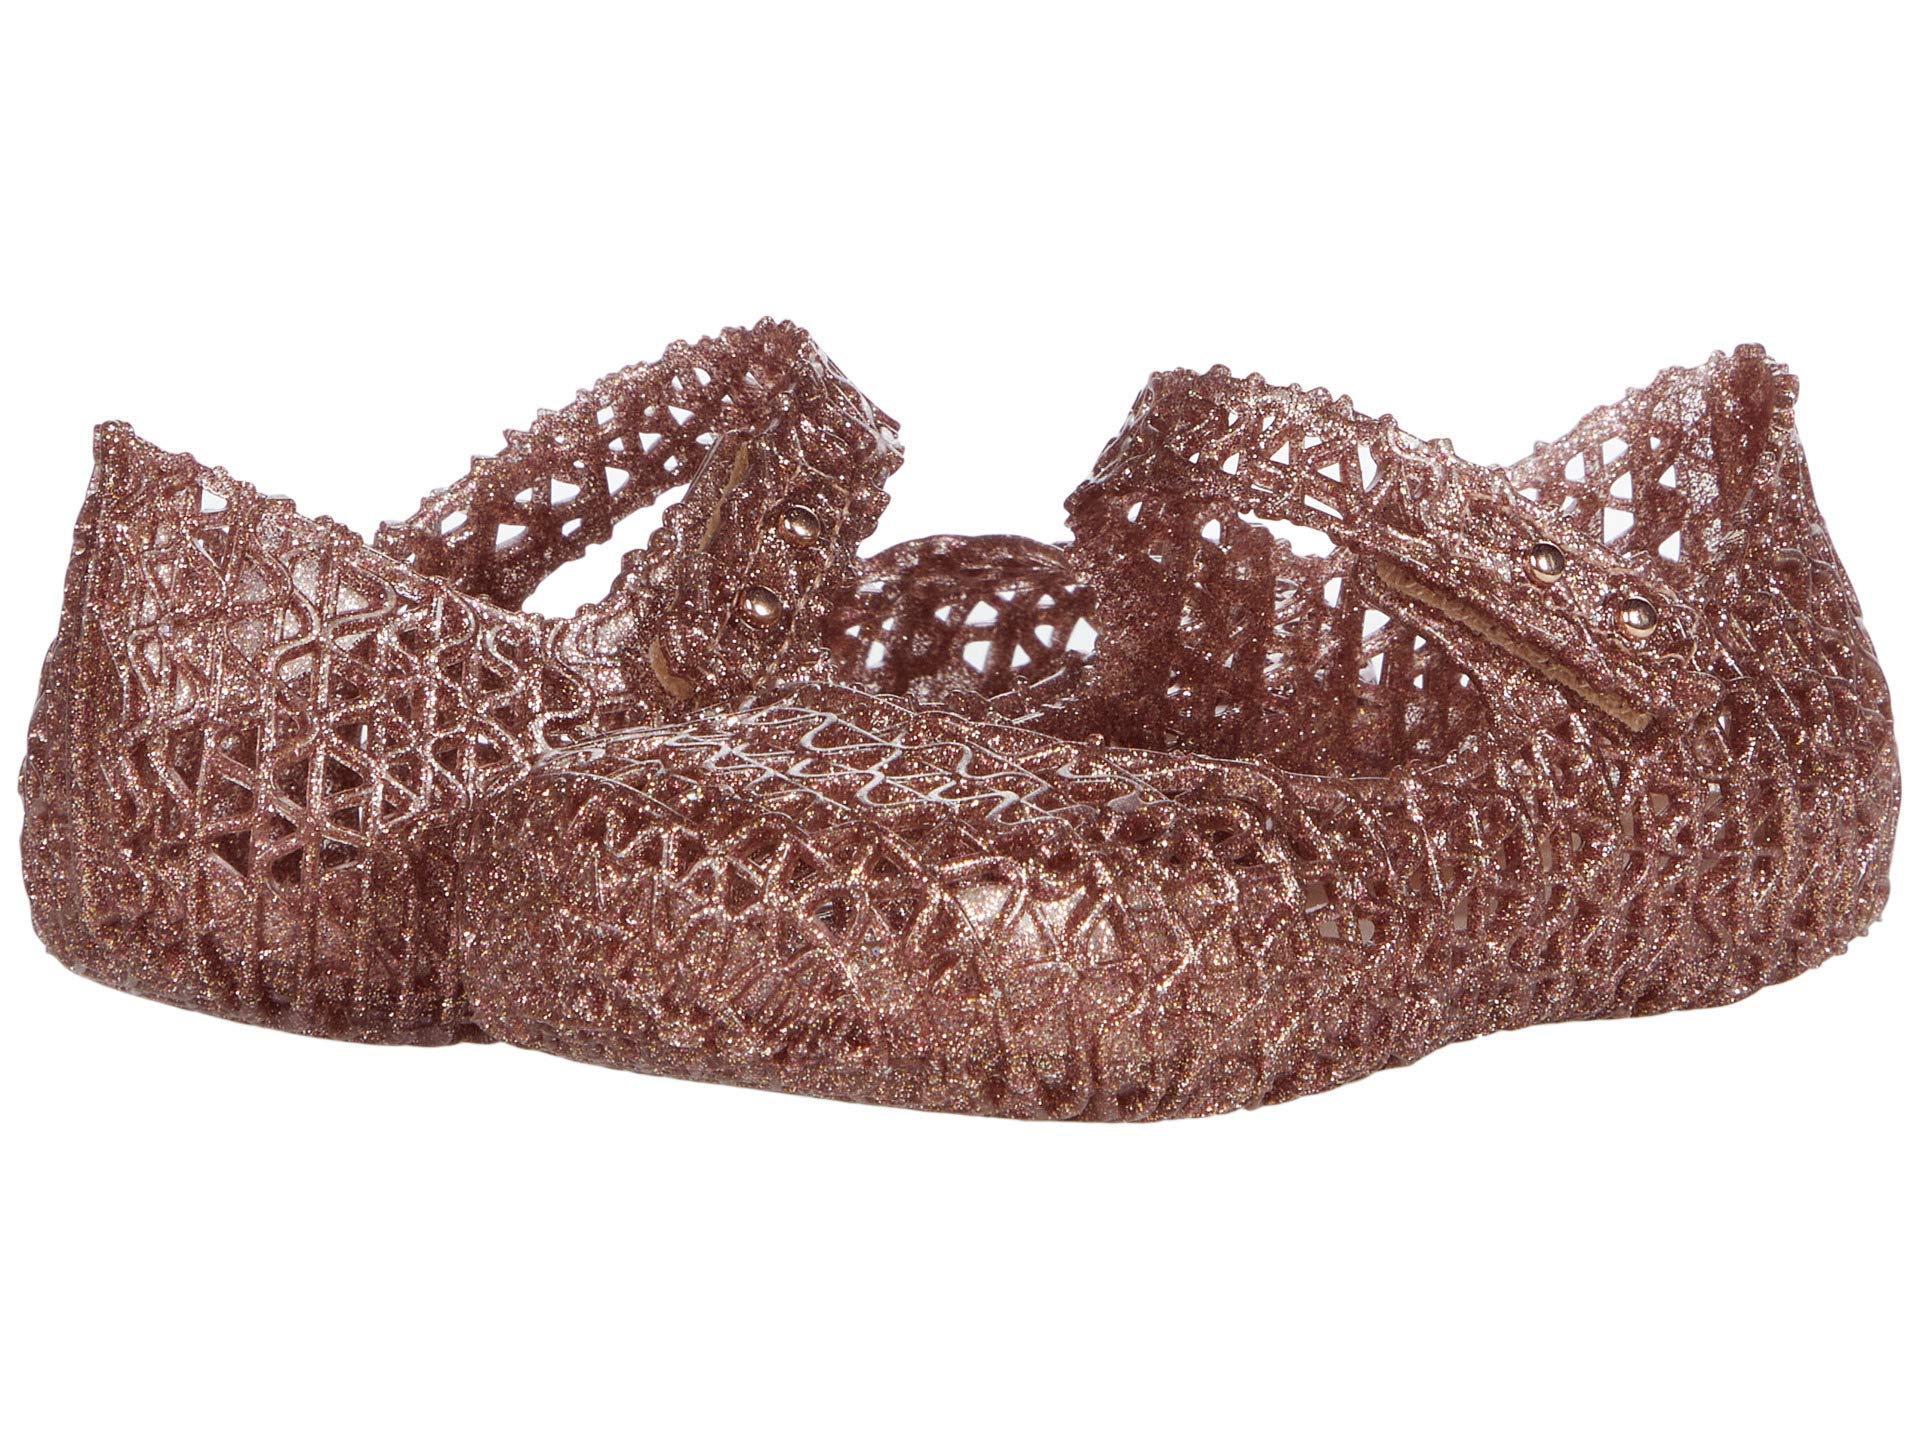 Melissa Mini Campana Papel Flats for Babies, Toddlers - Comfortable & Cute Close-Toe Jelly Flat Shoes with Mary-Jane Strap & Interwoven Cut-Out Design